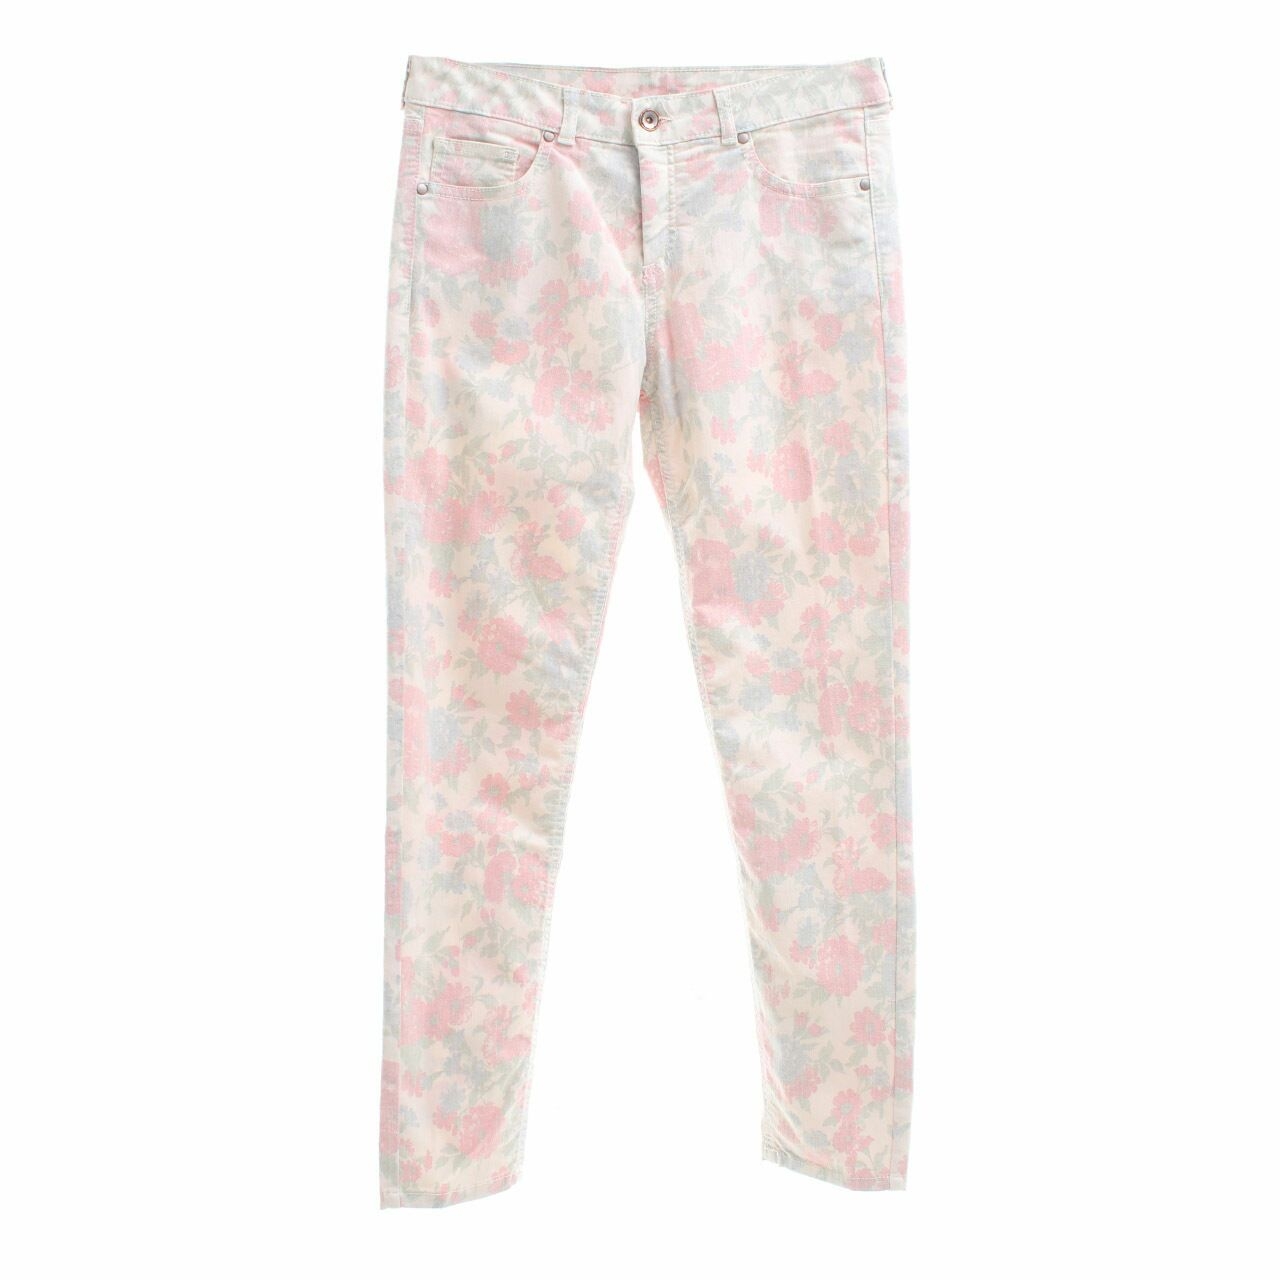 United Colors Of Benetton Cream Floral Skinny Long Pants